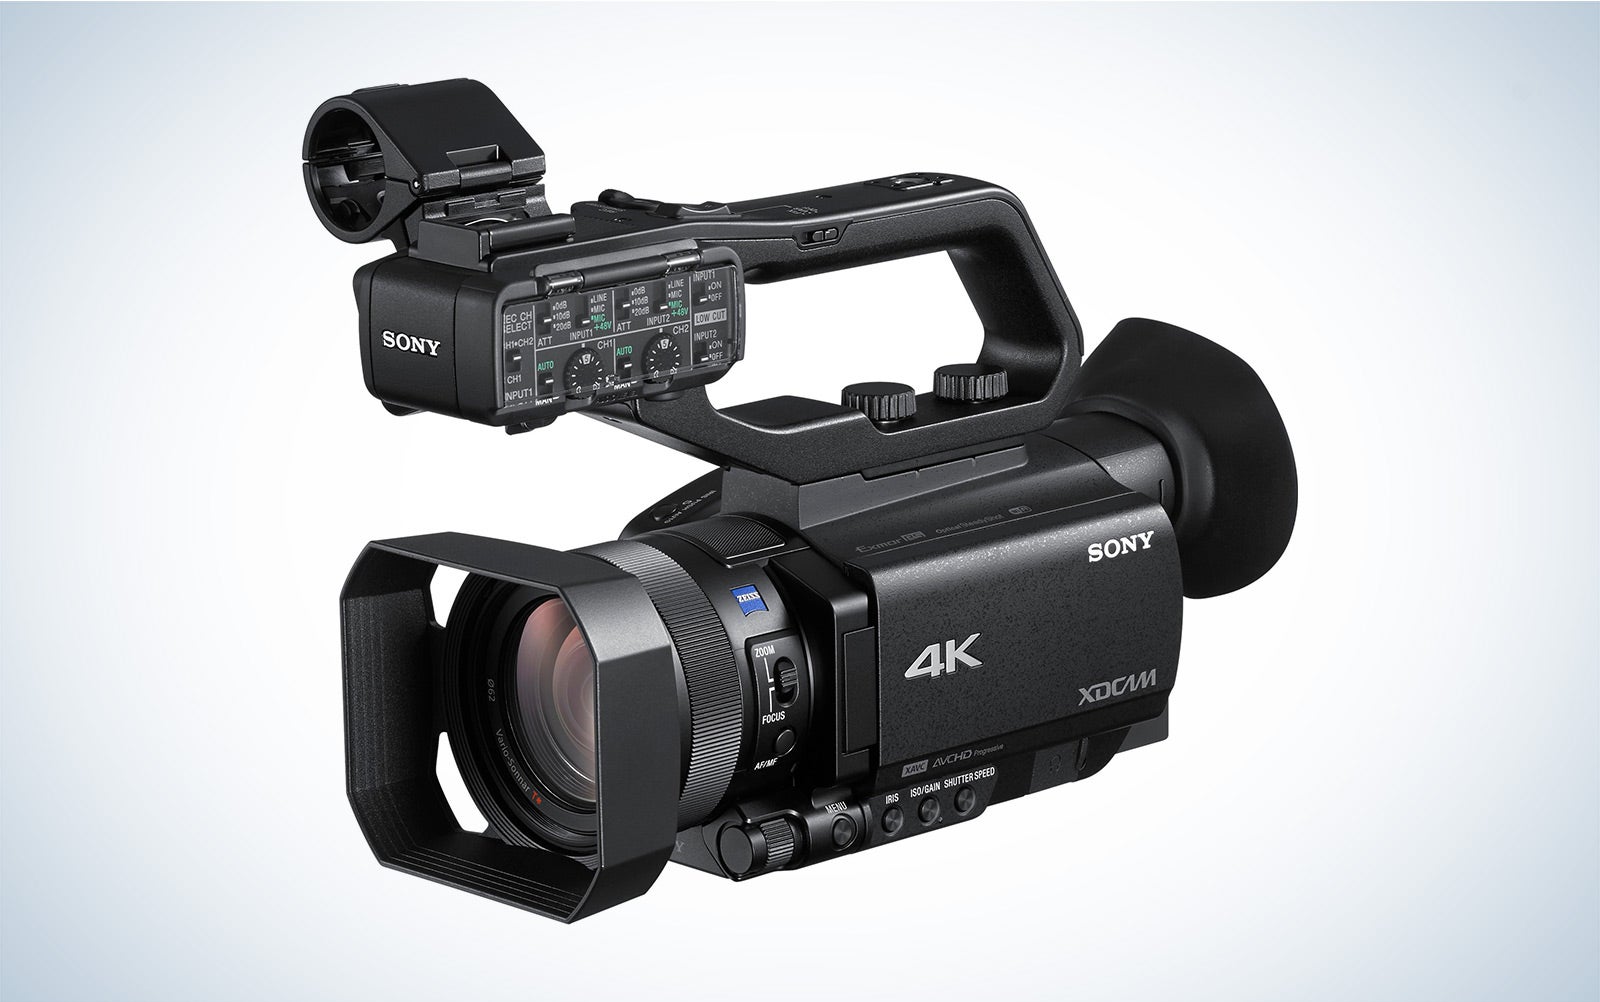 The Sony XDCAM camcorder is the best camcorder for filmmaking on a budget.